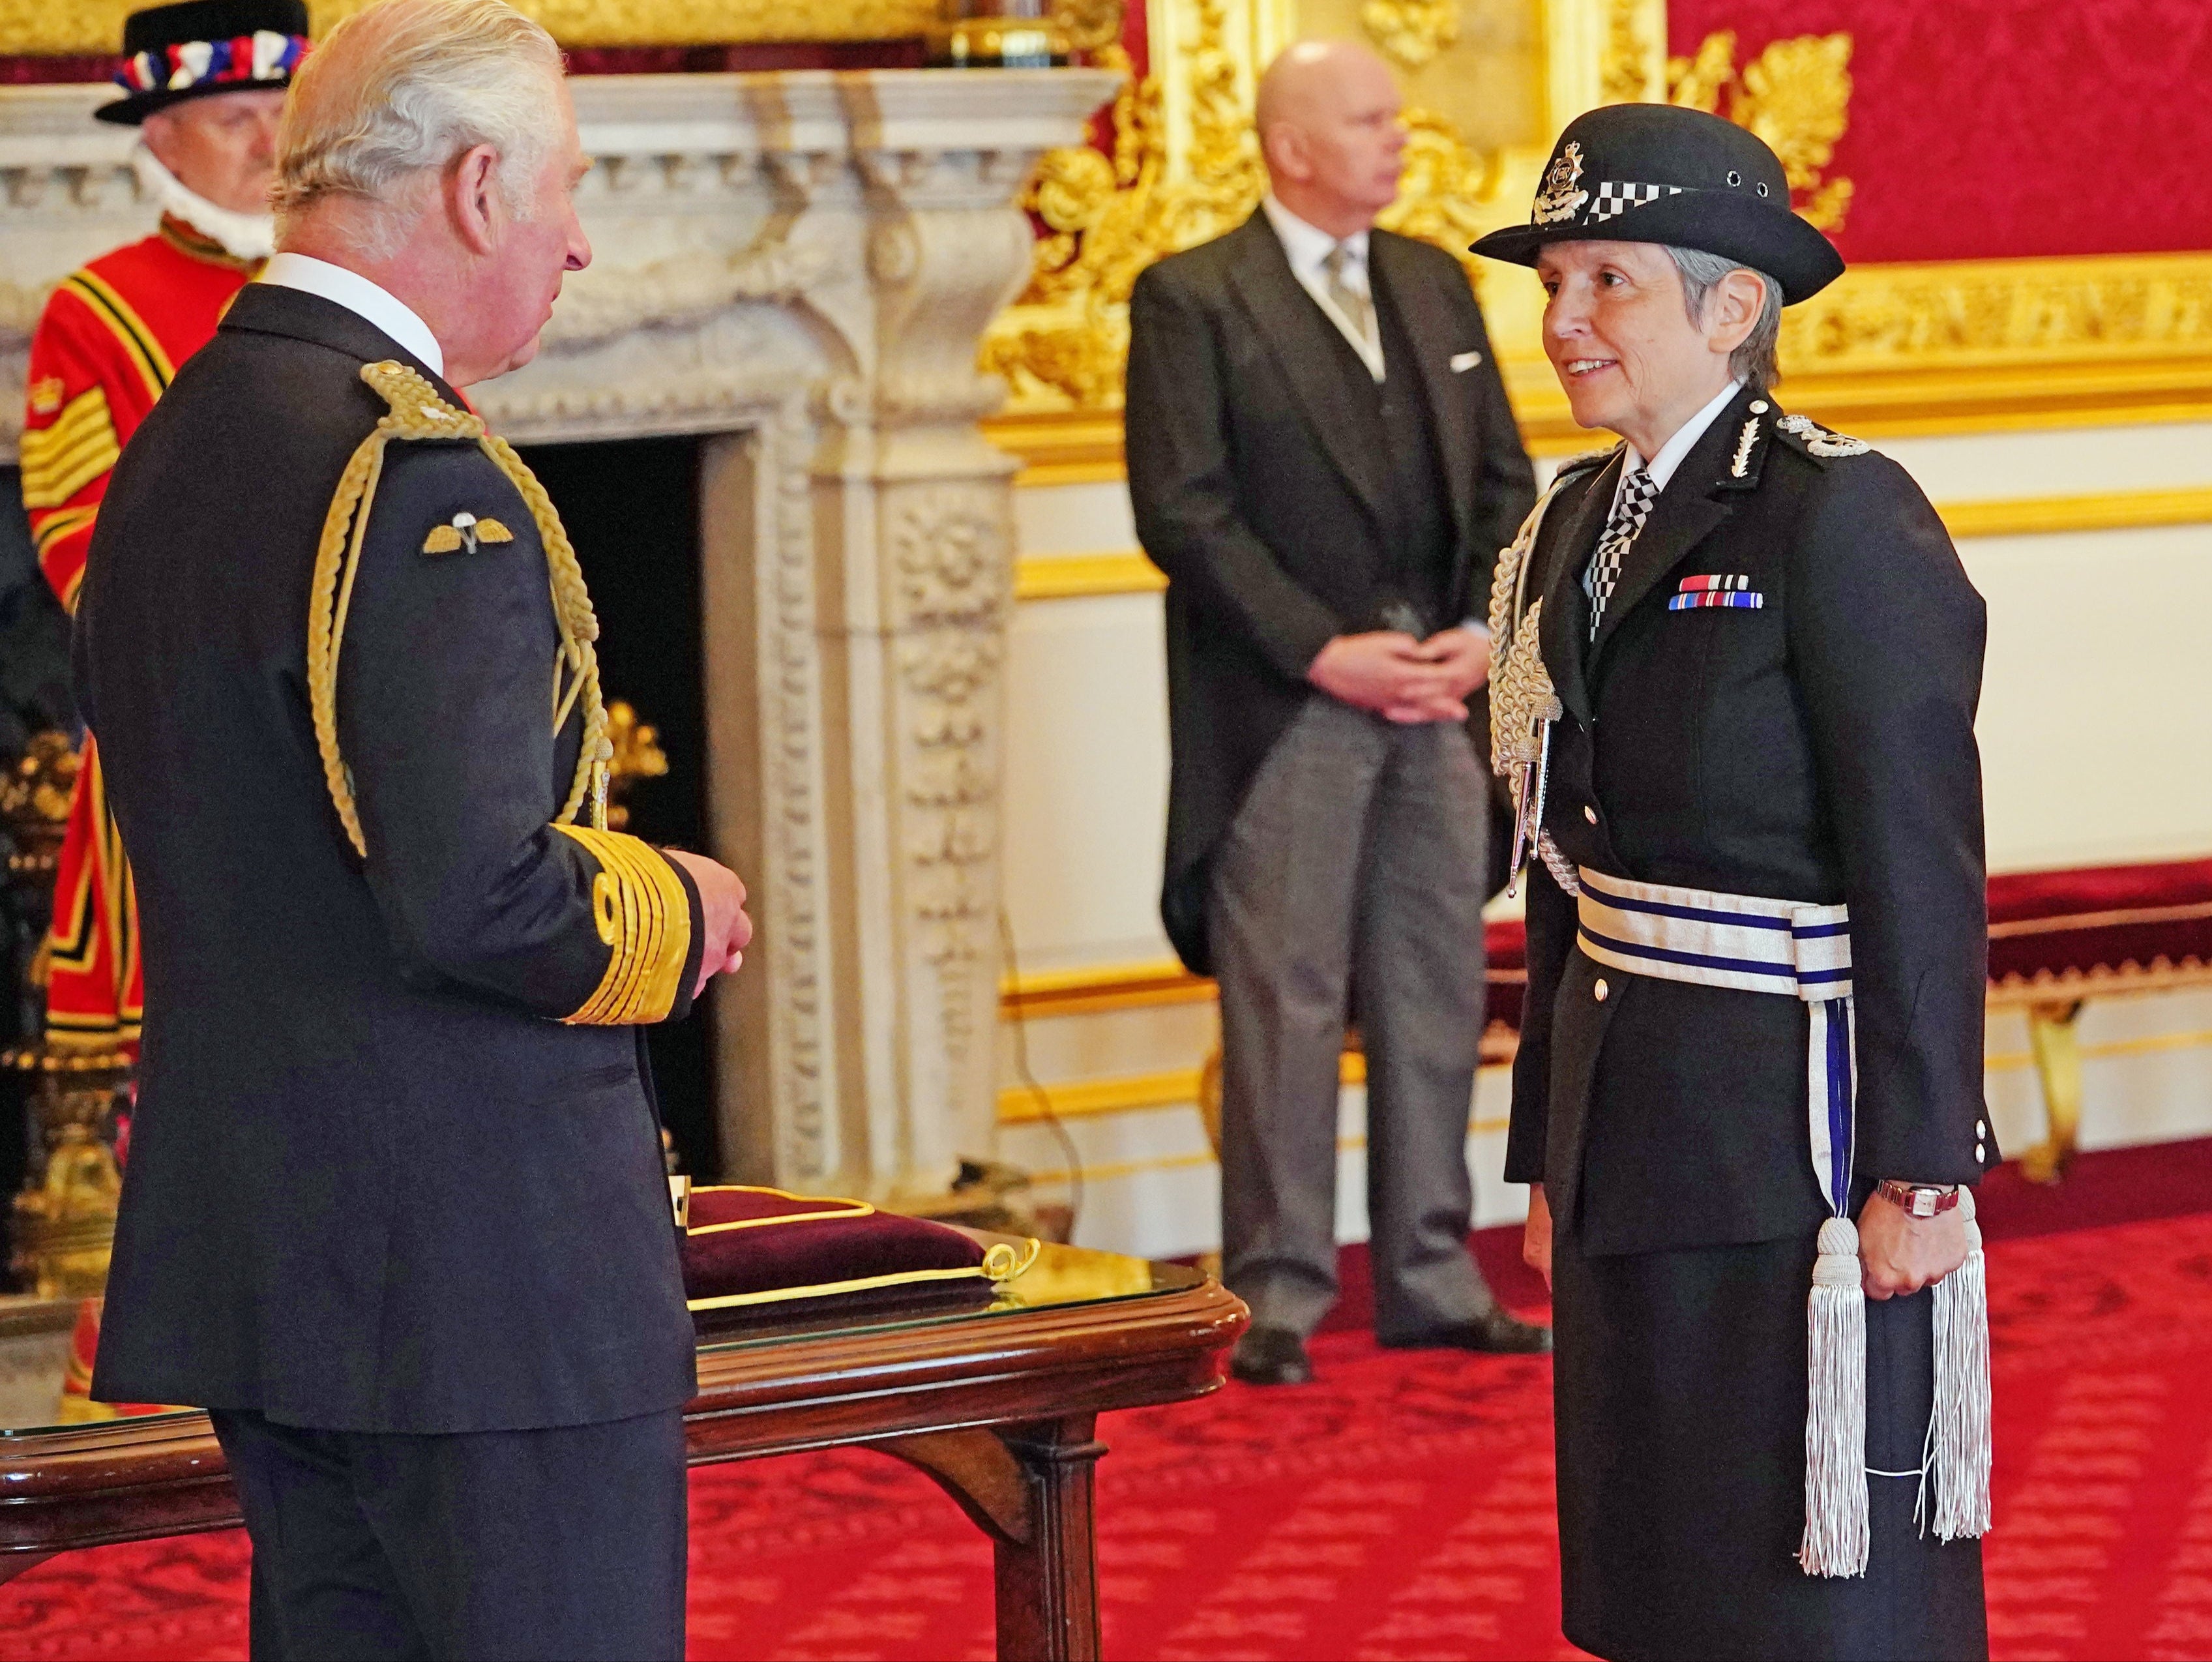 Metropolitan Police Commissioner Cressida Dick is made a Dame Commander of the Order of the British Empire by the Prince of Wales during an investiture ceremony at St James's Palace in central London